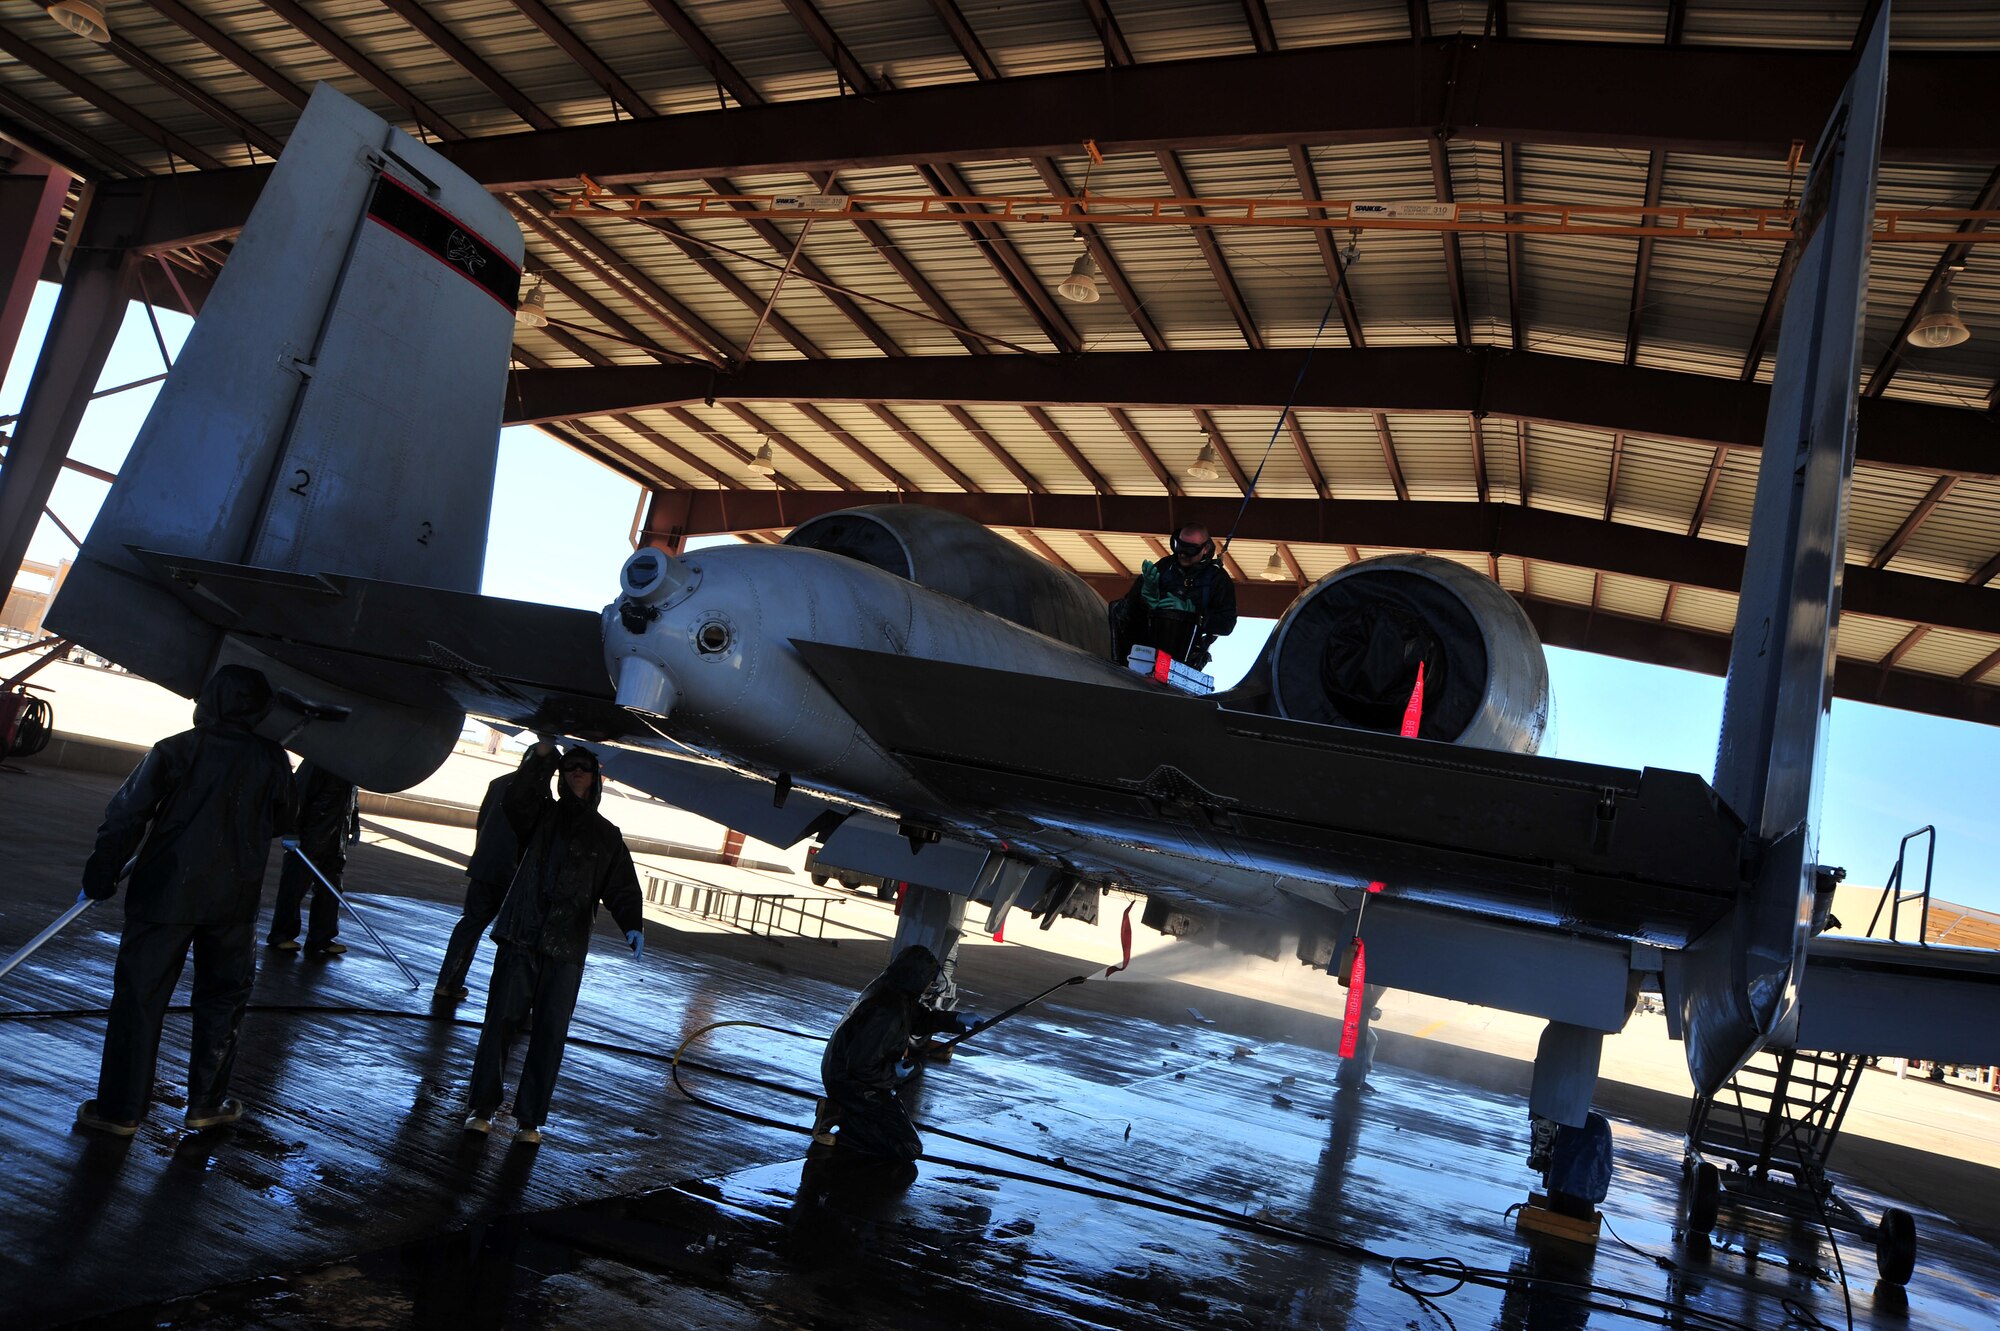 The 355th Aircraft Maintenance Squadron leadership work with their Airmen to wash an A-10C Thunderbolt at Davis-Monthan Air Force Base, Ariz., Jan. 28, 2014.  The Airmen use pressure washers with more than 3,000 pounds of pressure per square inch to clean the aircraft. (U.S. Air Force photo by Senior Airman Josh Slavin/released)